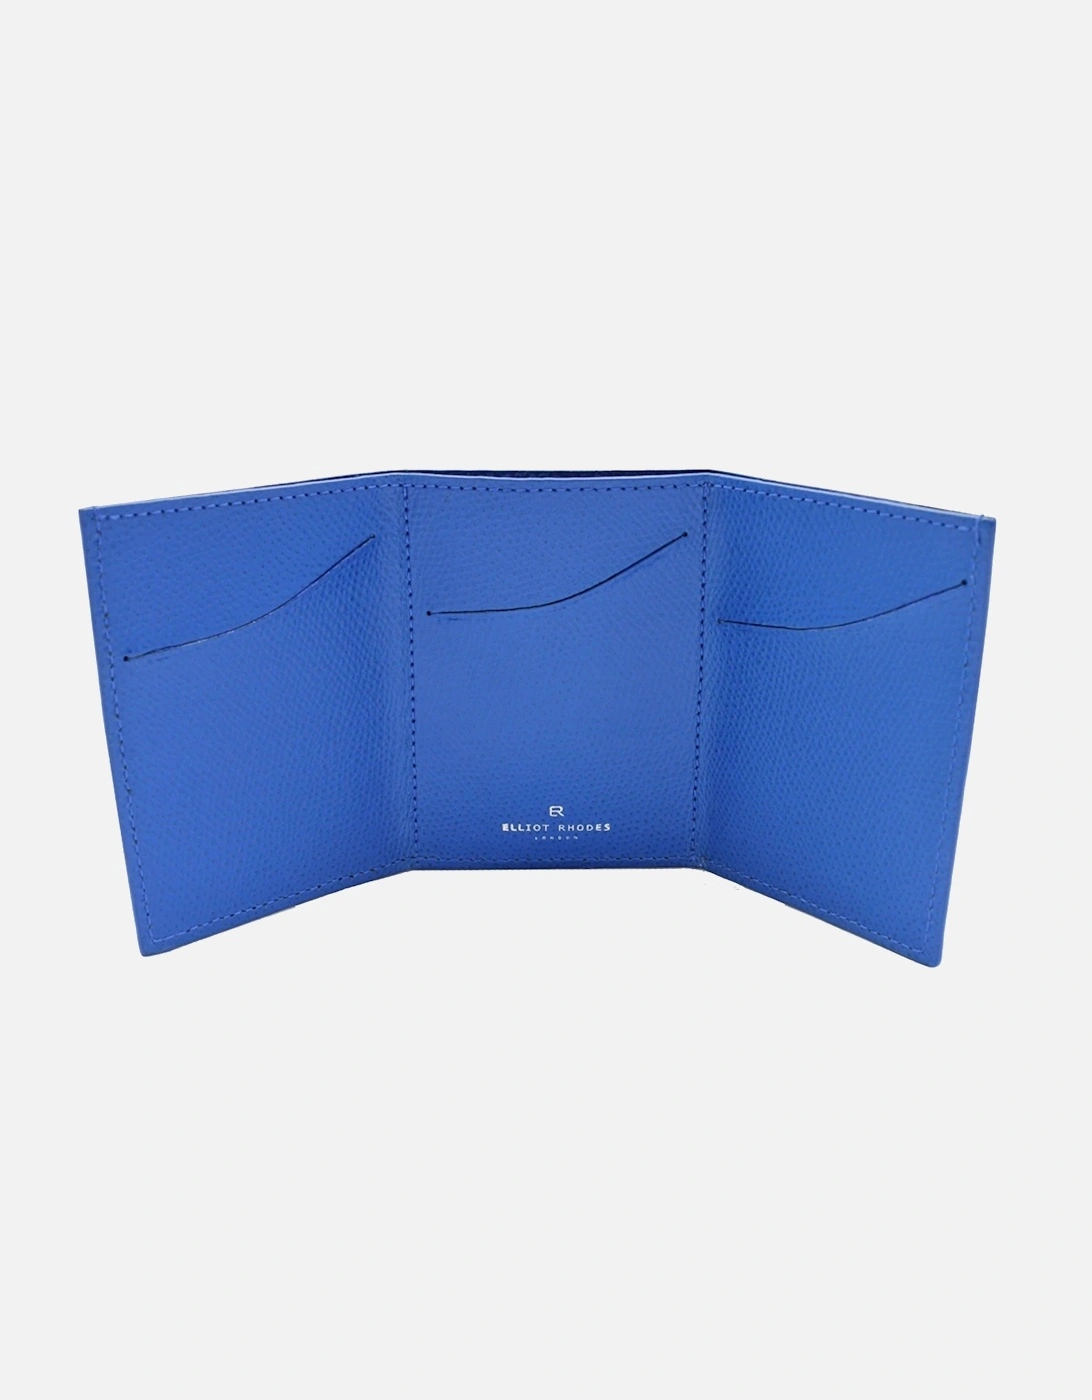 Dauphin Trifold Credit Card Holder Royal